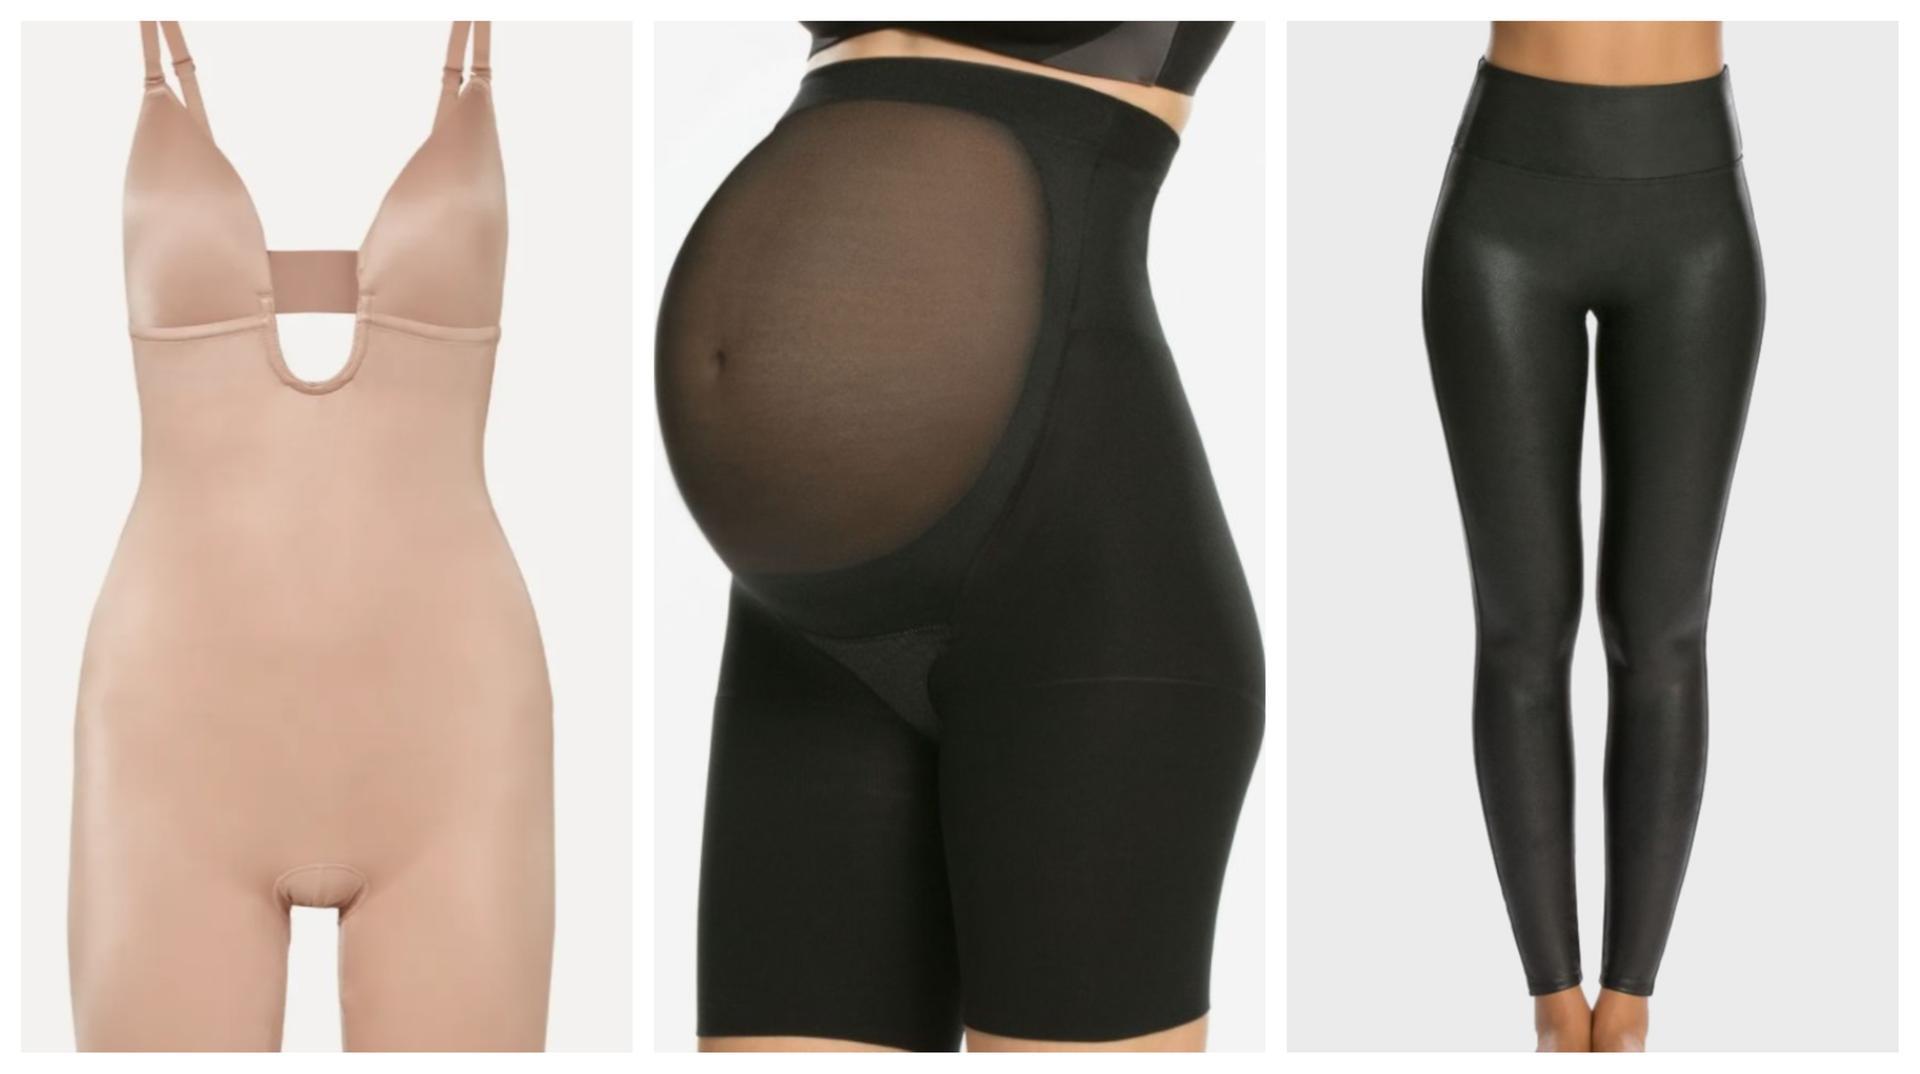 From Spanx and Skims to M&S: Where to find shapewear solutions in the UAE